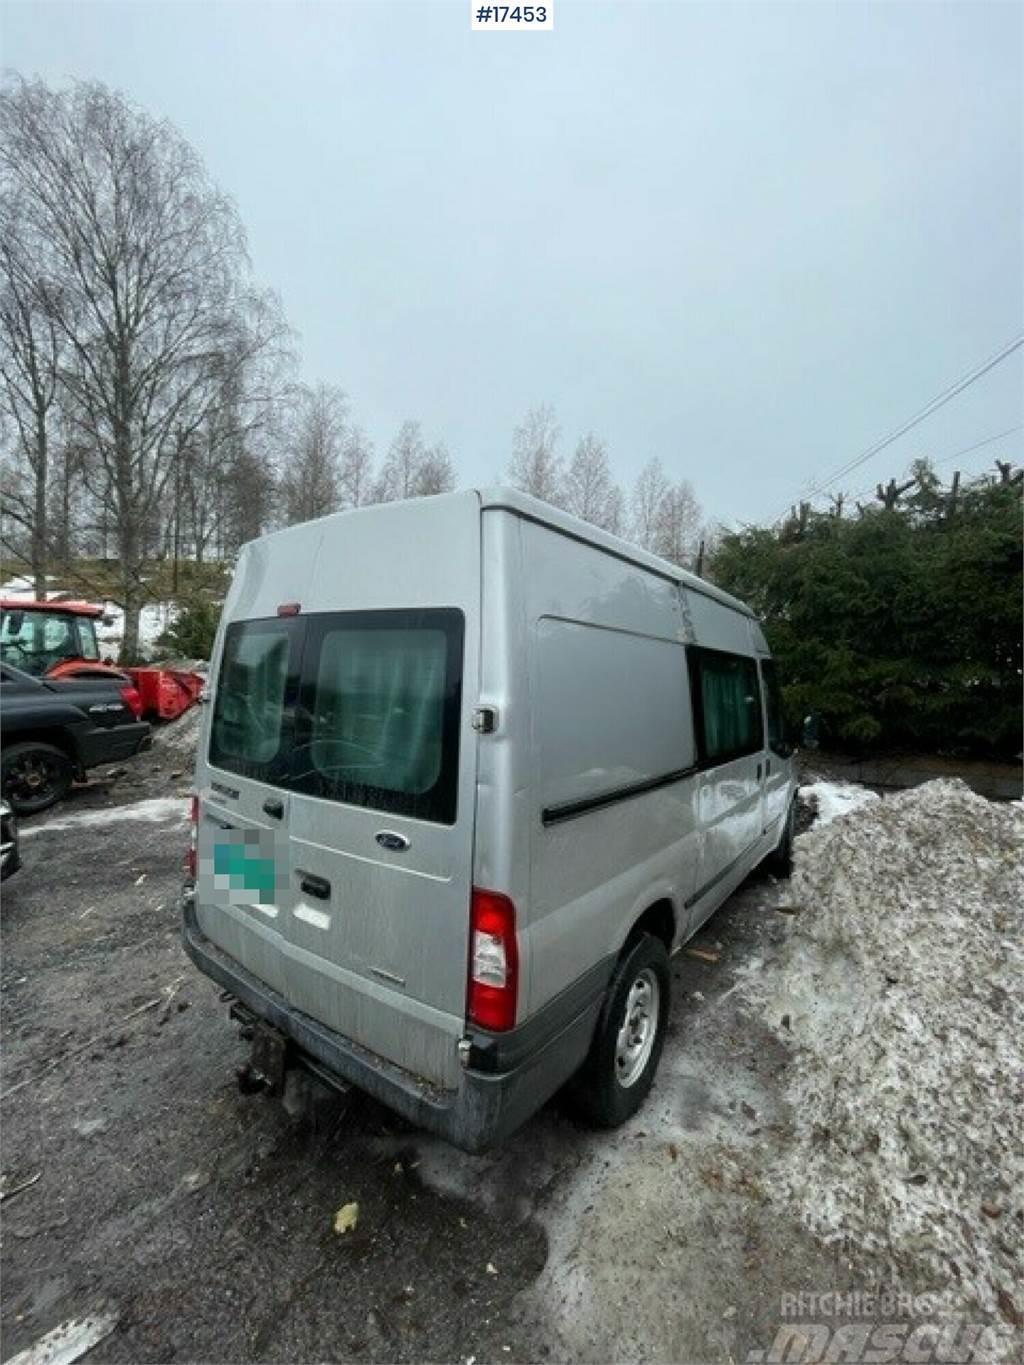 Ford Transit 4x4. Rep object. Utilitaire